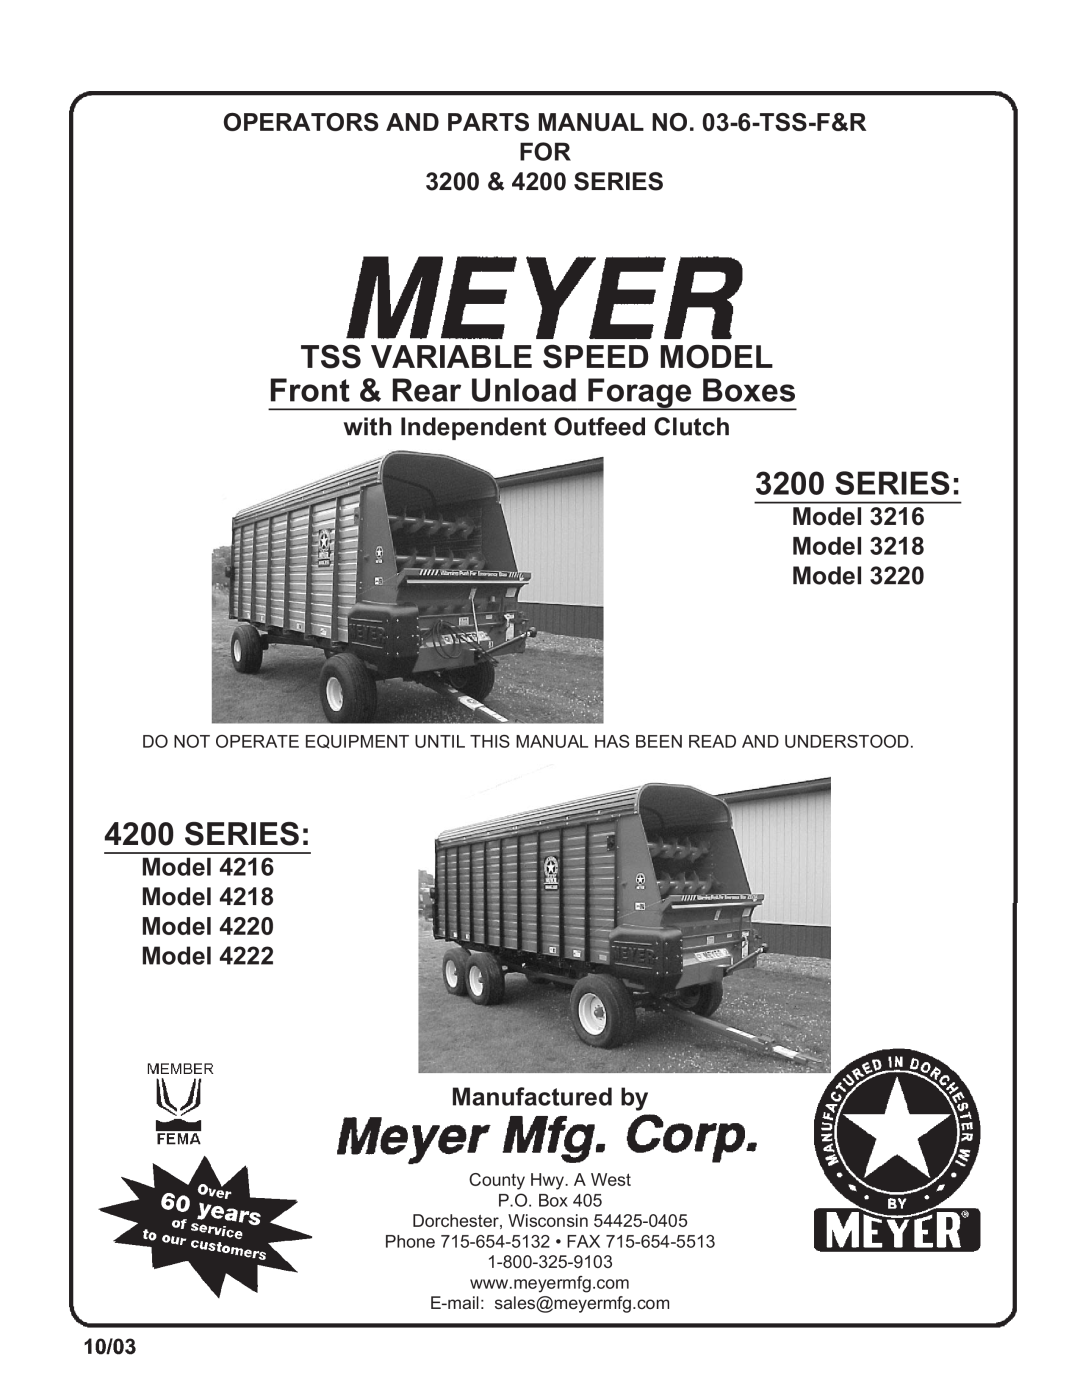 Meyer 4220, 4218, 3220 manual Tss Variable Speed Model, Front & Rear Unload Forage Boxes, Series, 3200 & 4200 SERIES, 10/03 